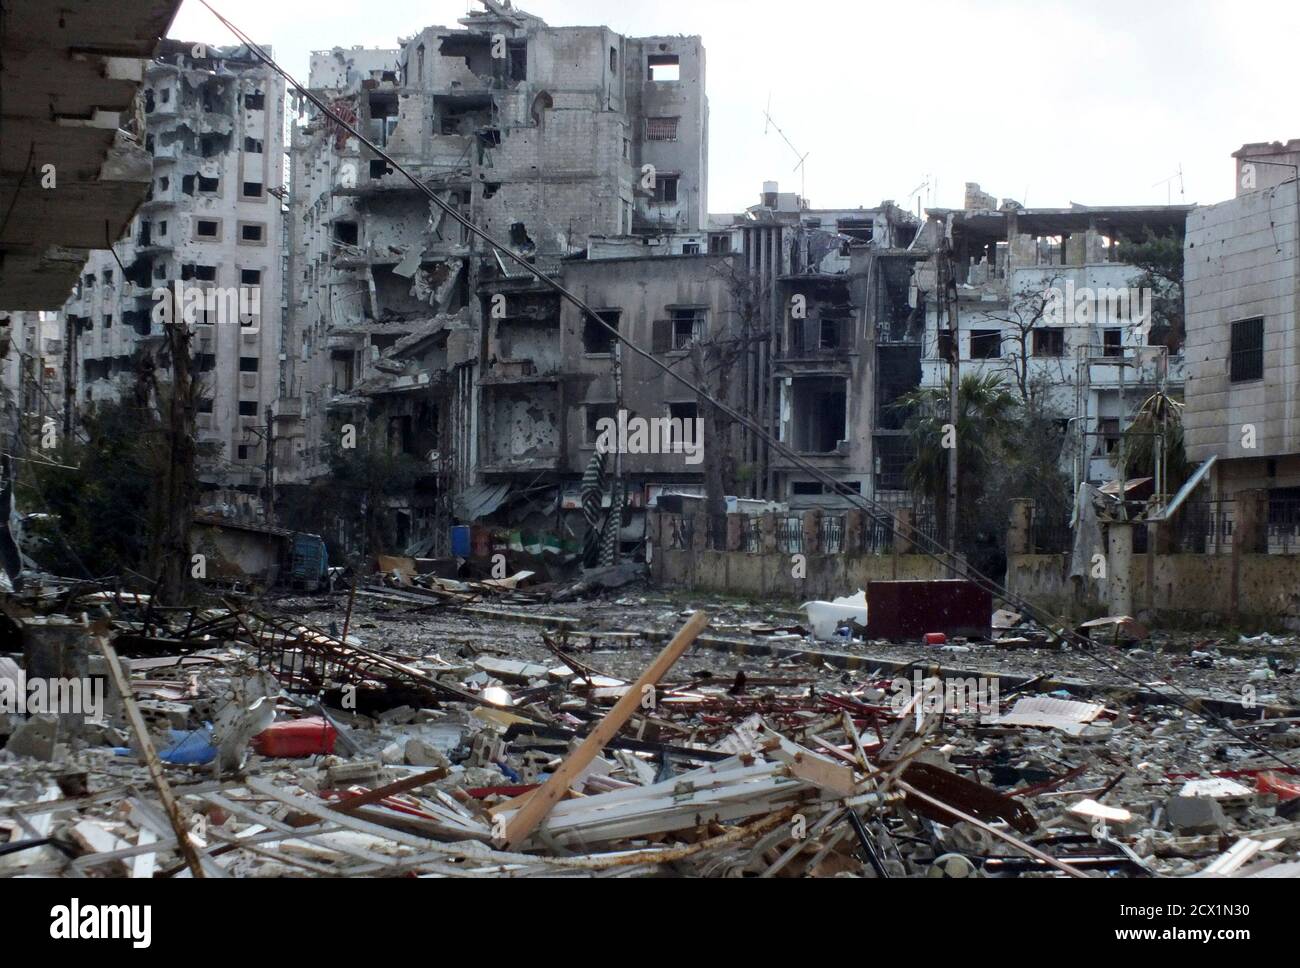 A general view of rubble and damaged buildings in Jouret al-Shayah, Homs February 2, 2013. Picture taken on February 2, 2013. REUTERS/Yazen Homsy (SYRIA - Tags: CONFLICT POLITICS CIVIL UNREST) Stock Photo